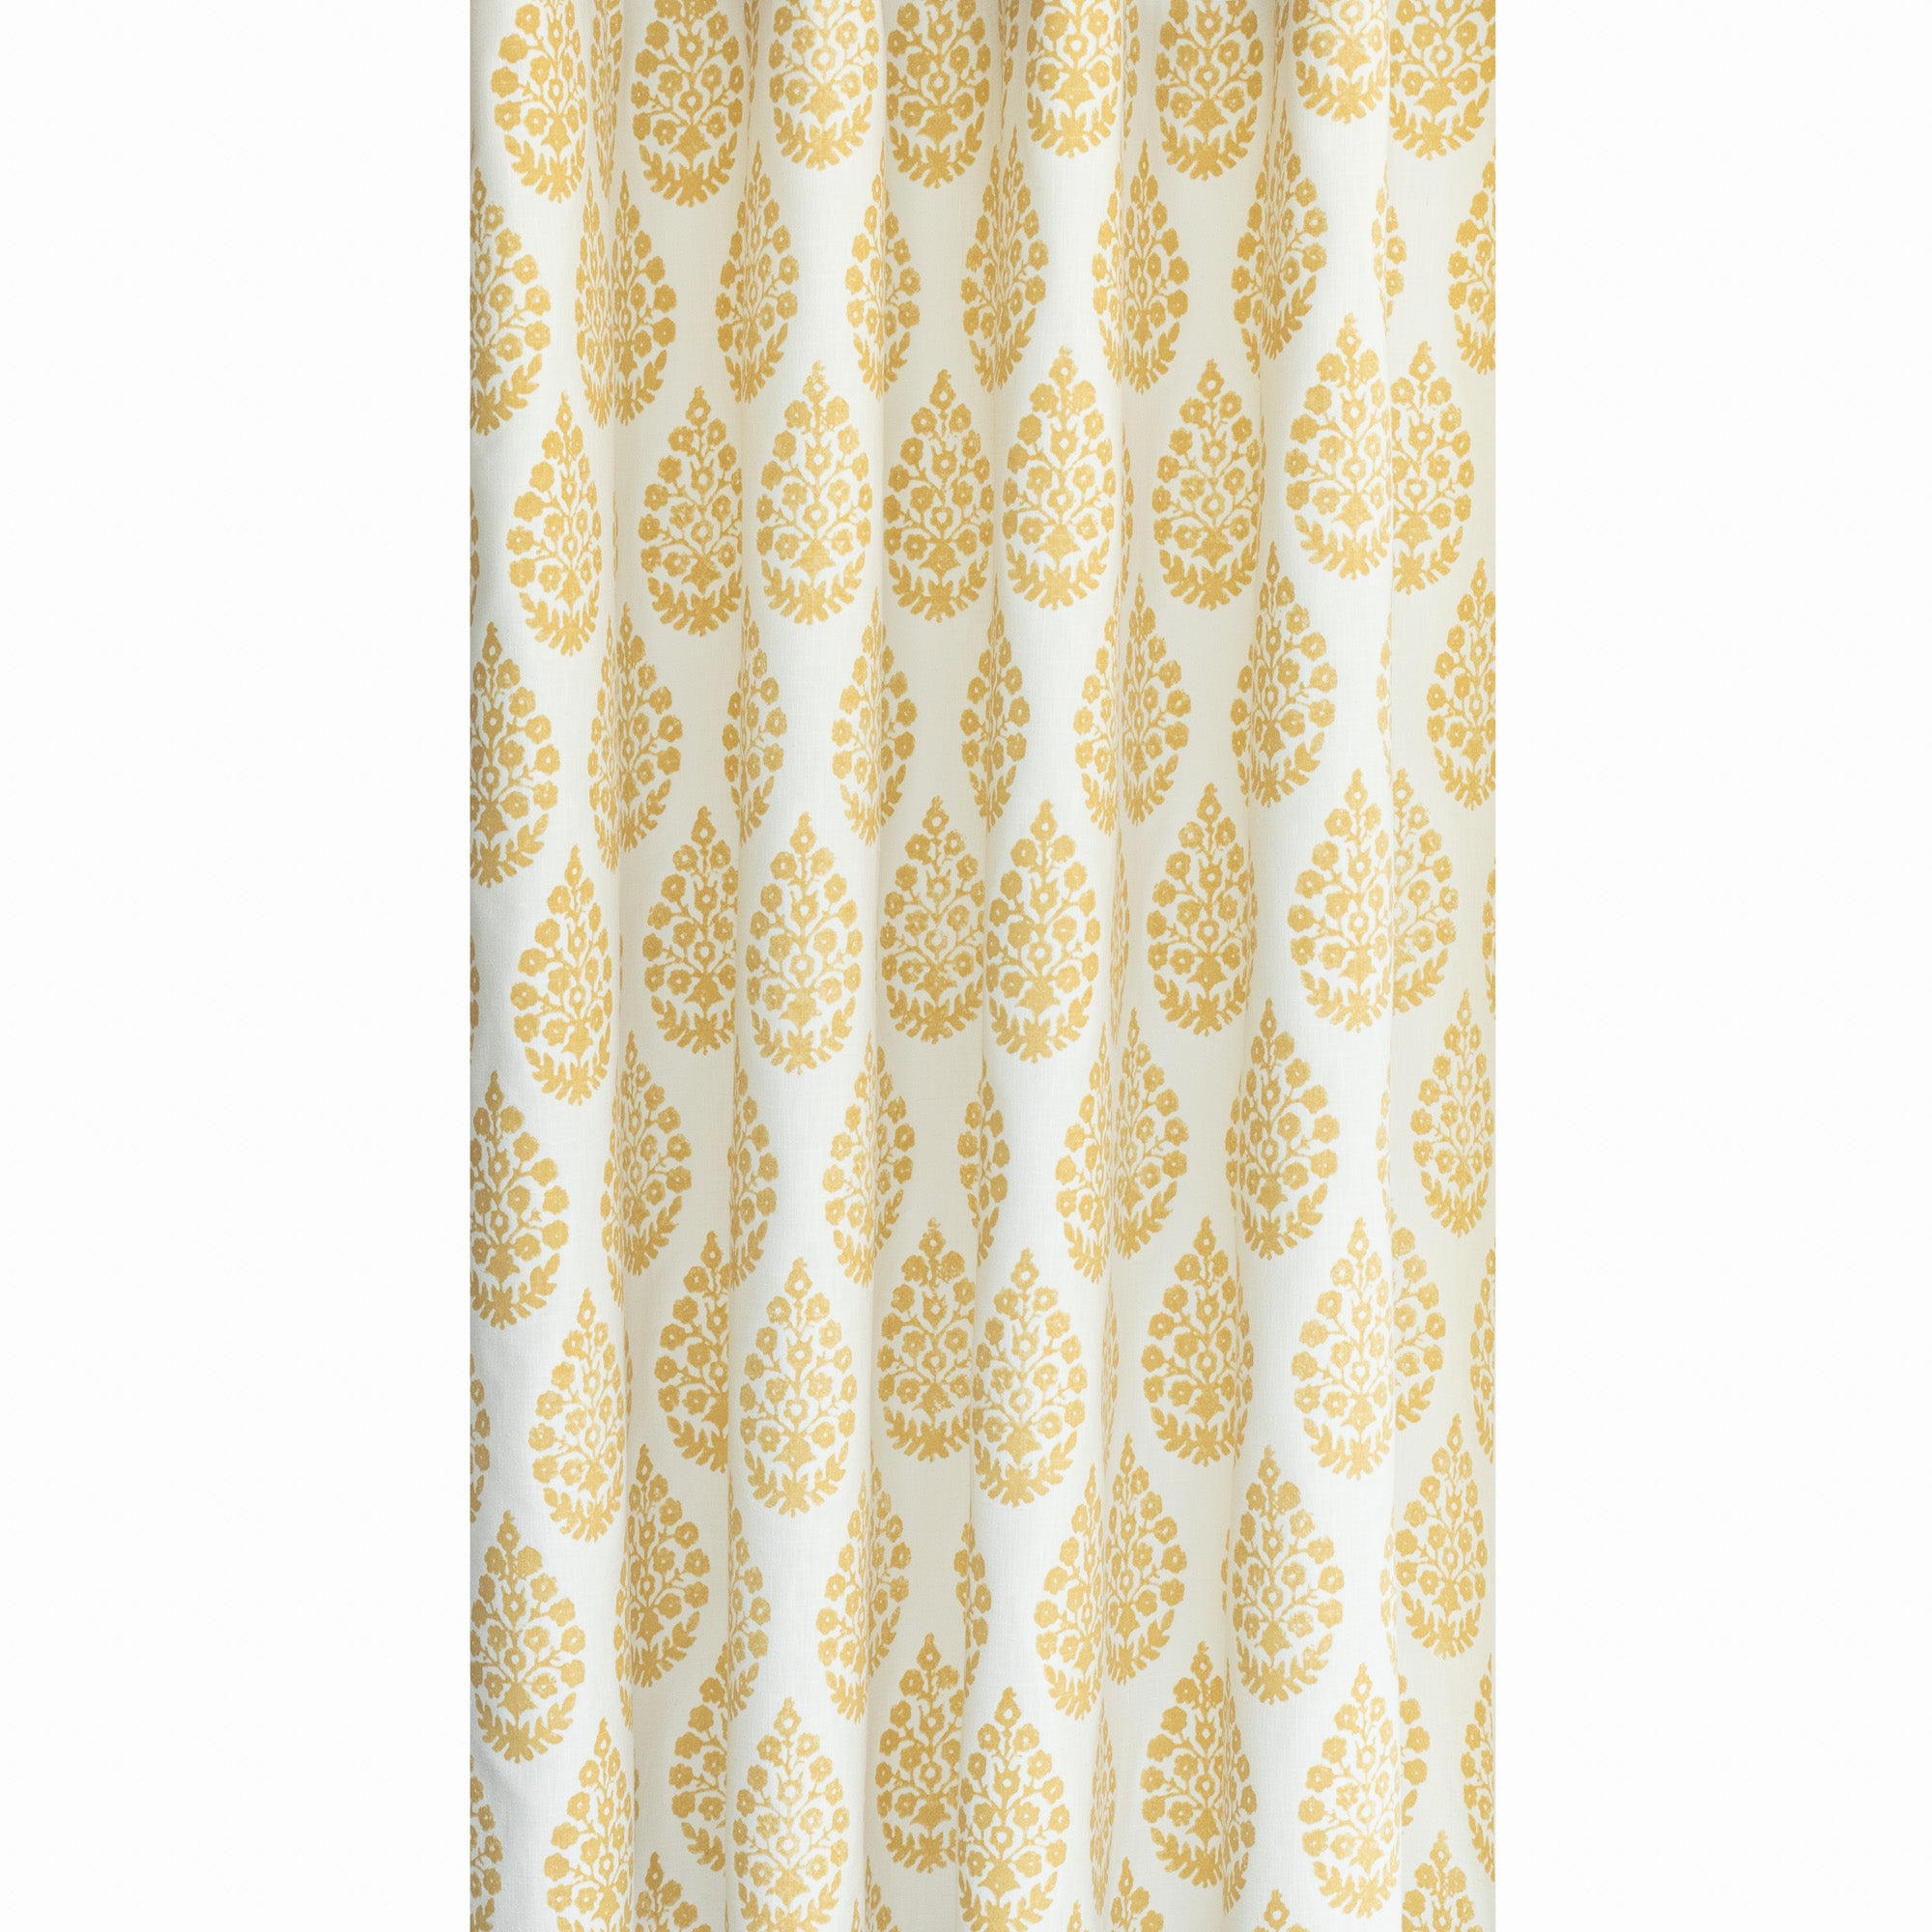 Chandra gold ochre yellow and cream floral block print curtain fabric from Tonic Living